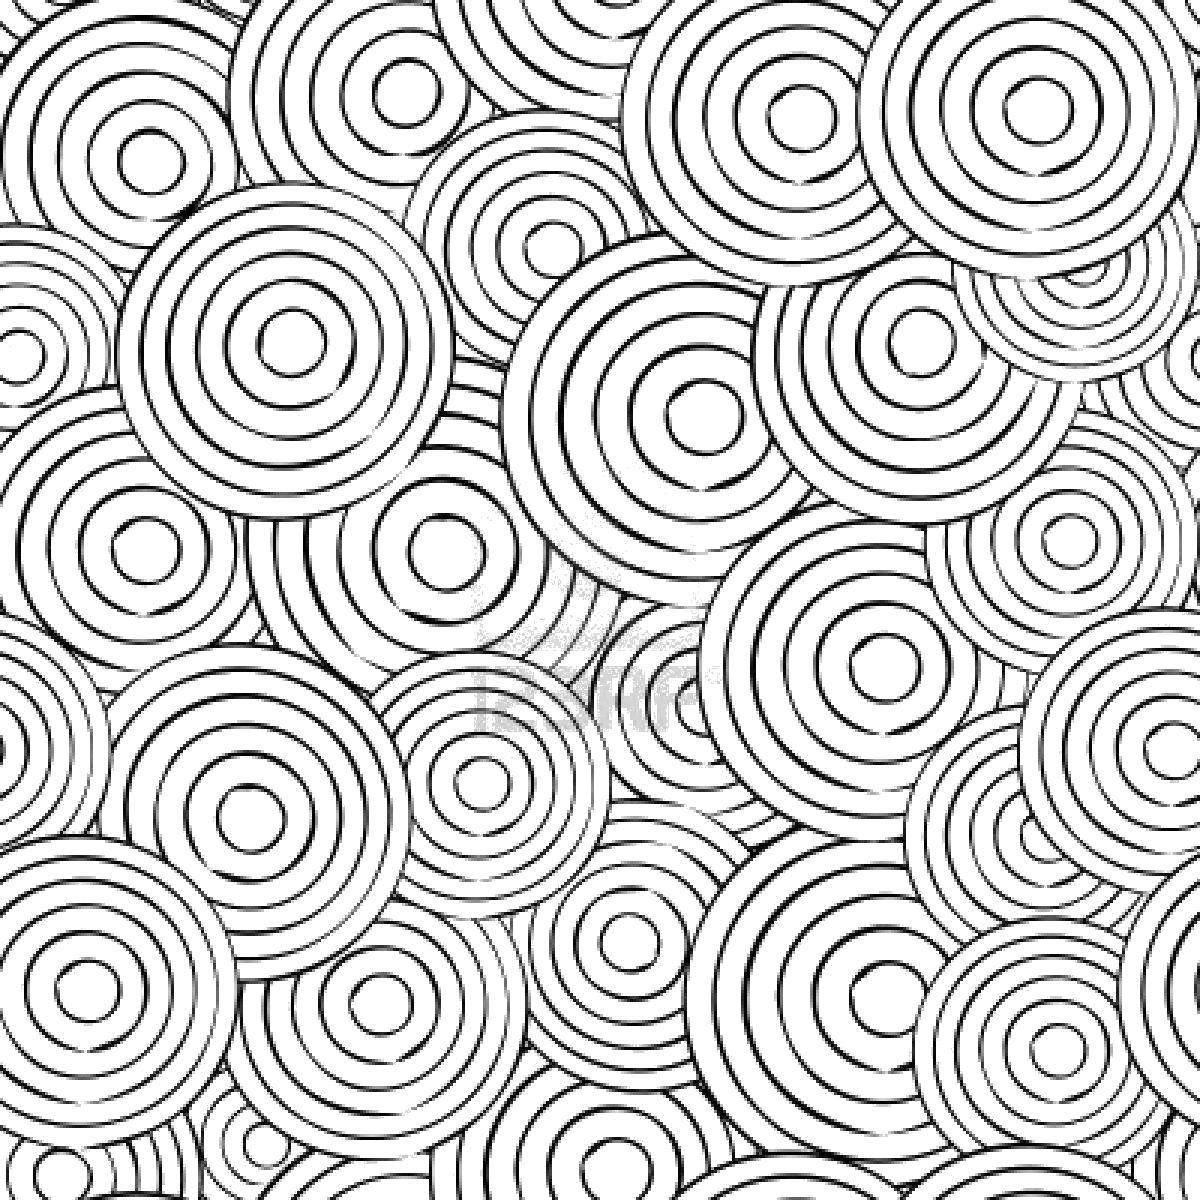 Coloring Swirling patterns. Category Patterns. Tags:  Patterns, geometric.